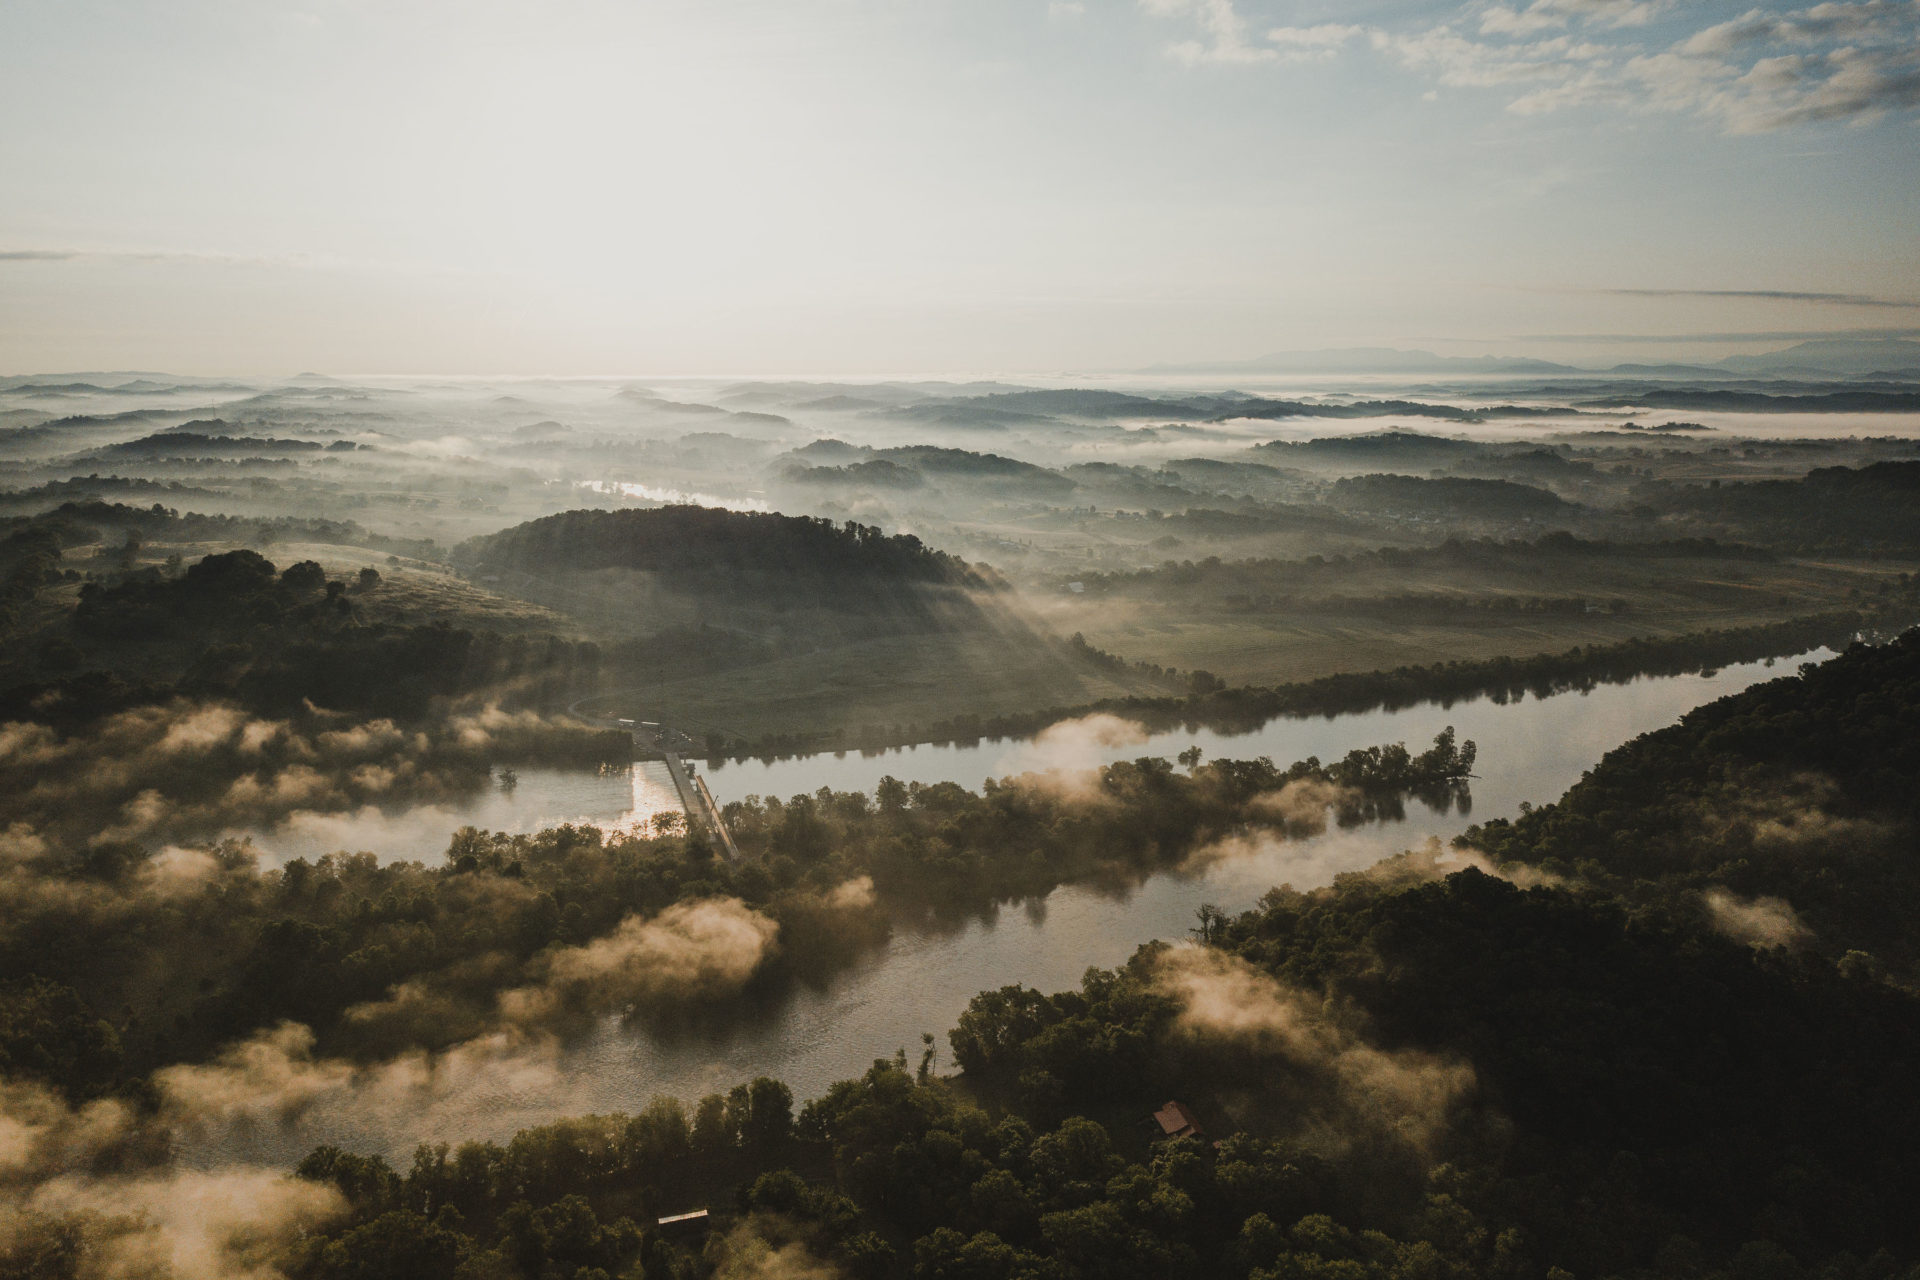 Drone photography of the French Broad River in East Tennessee.